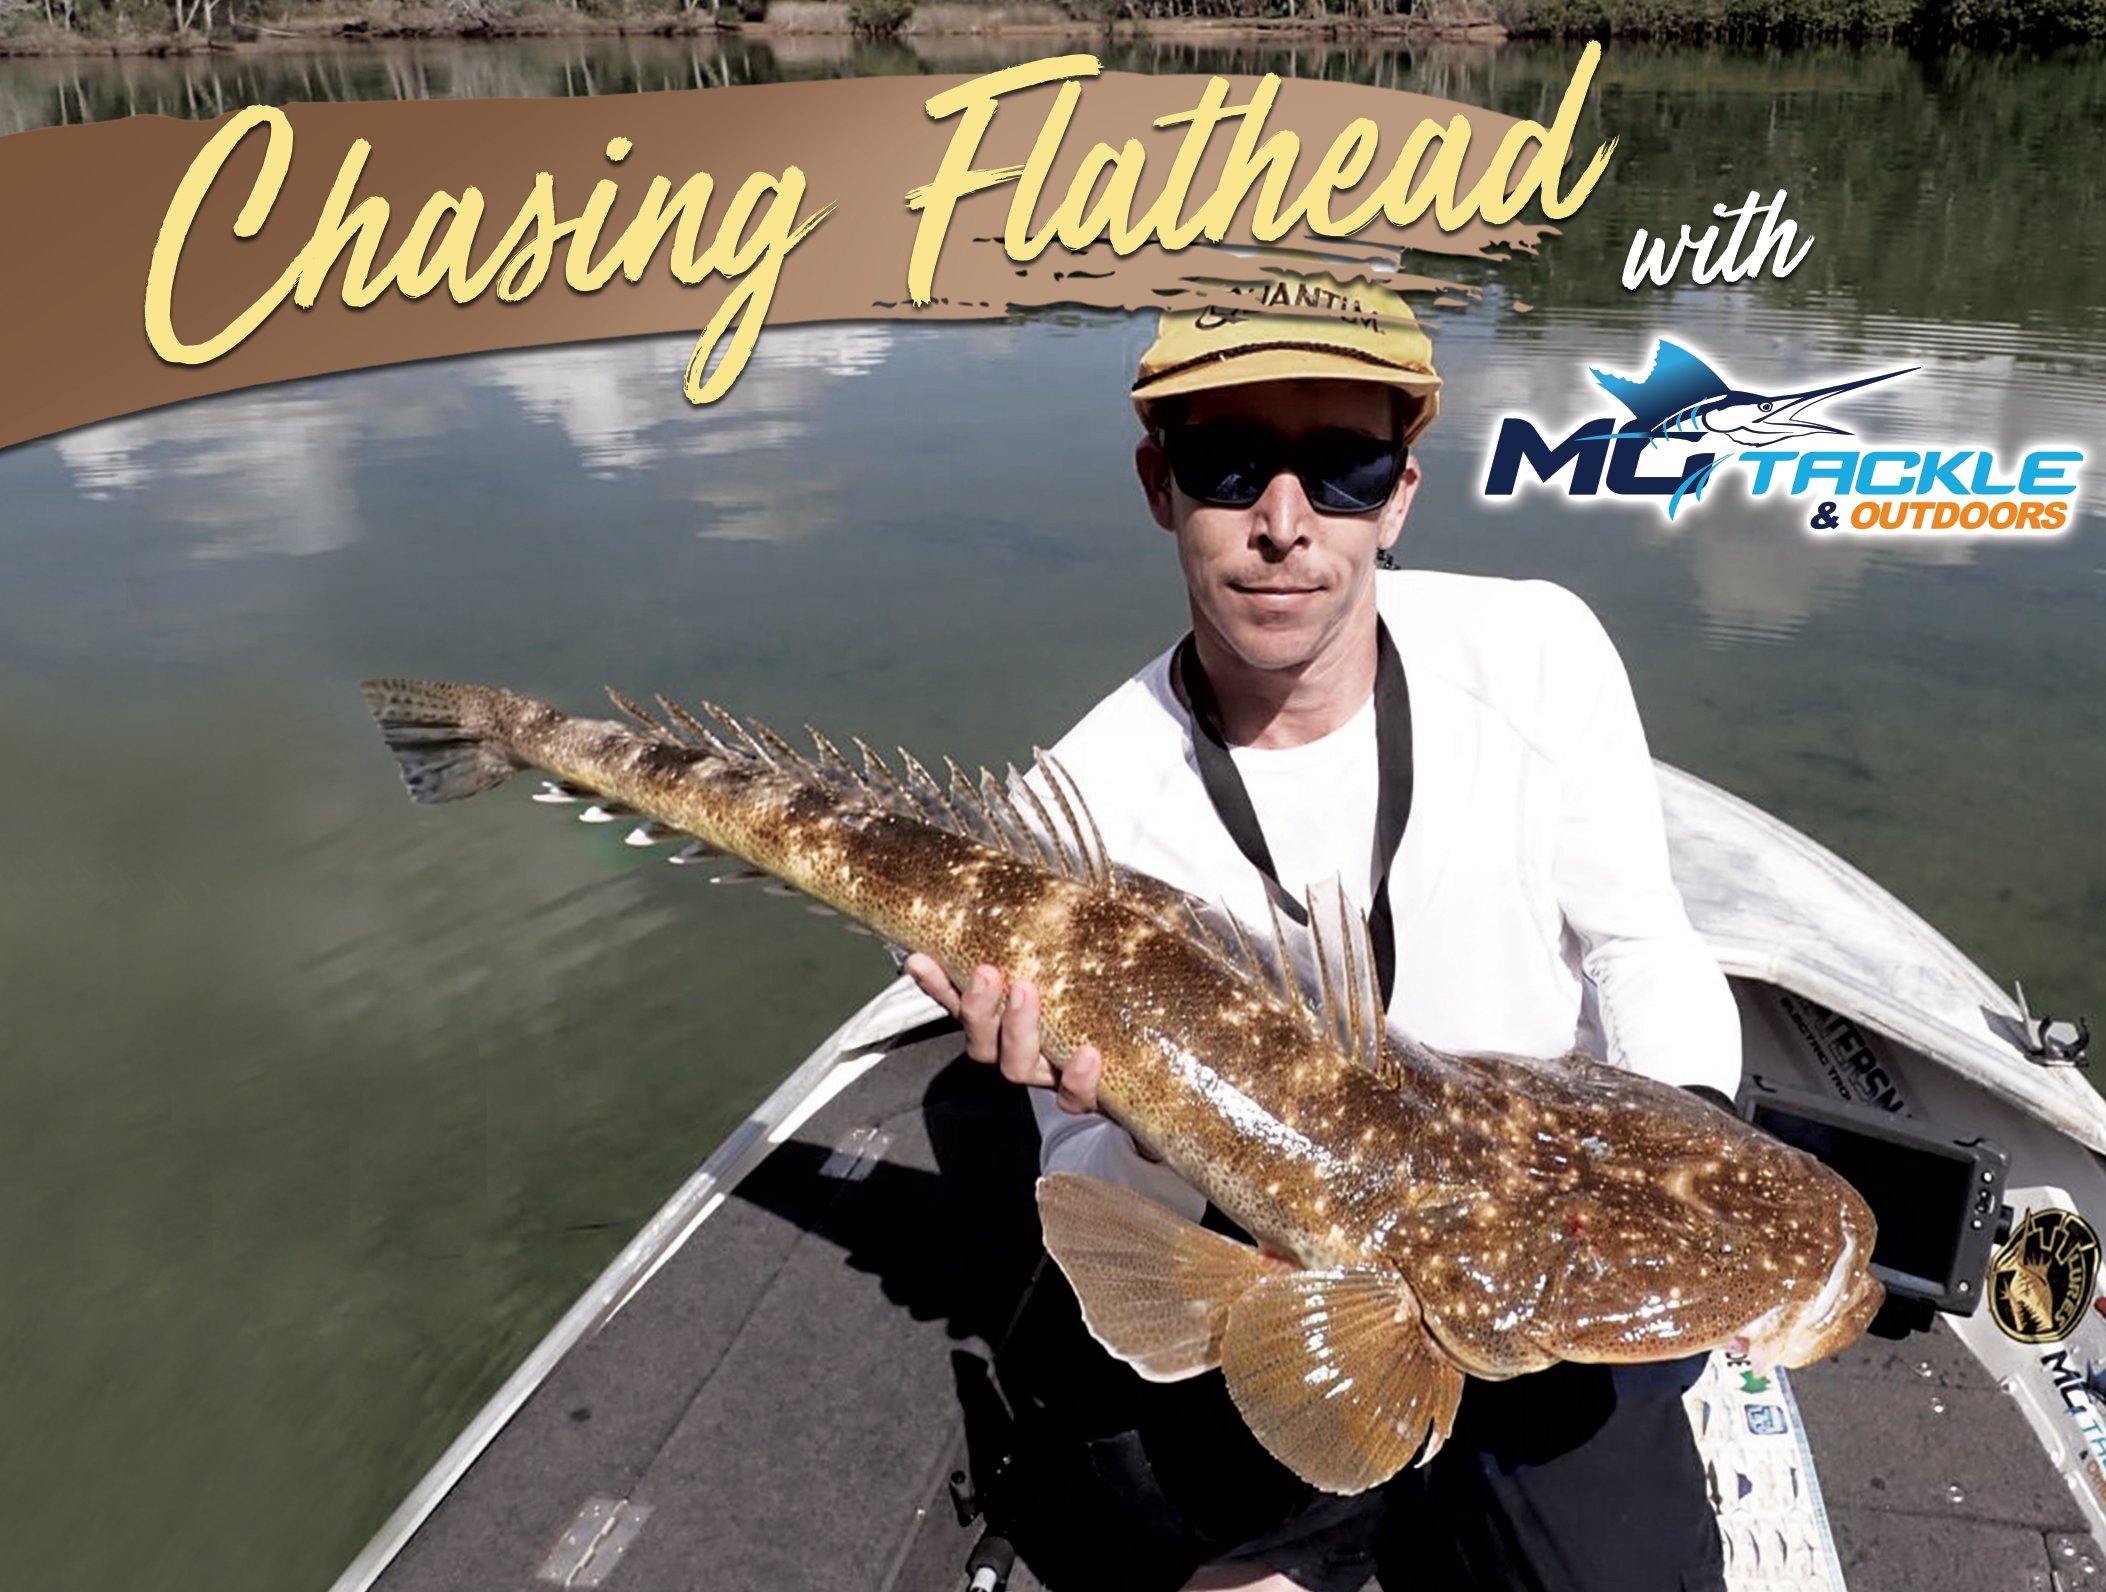 Chasing Flathead with Motackle & Outdoors